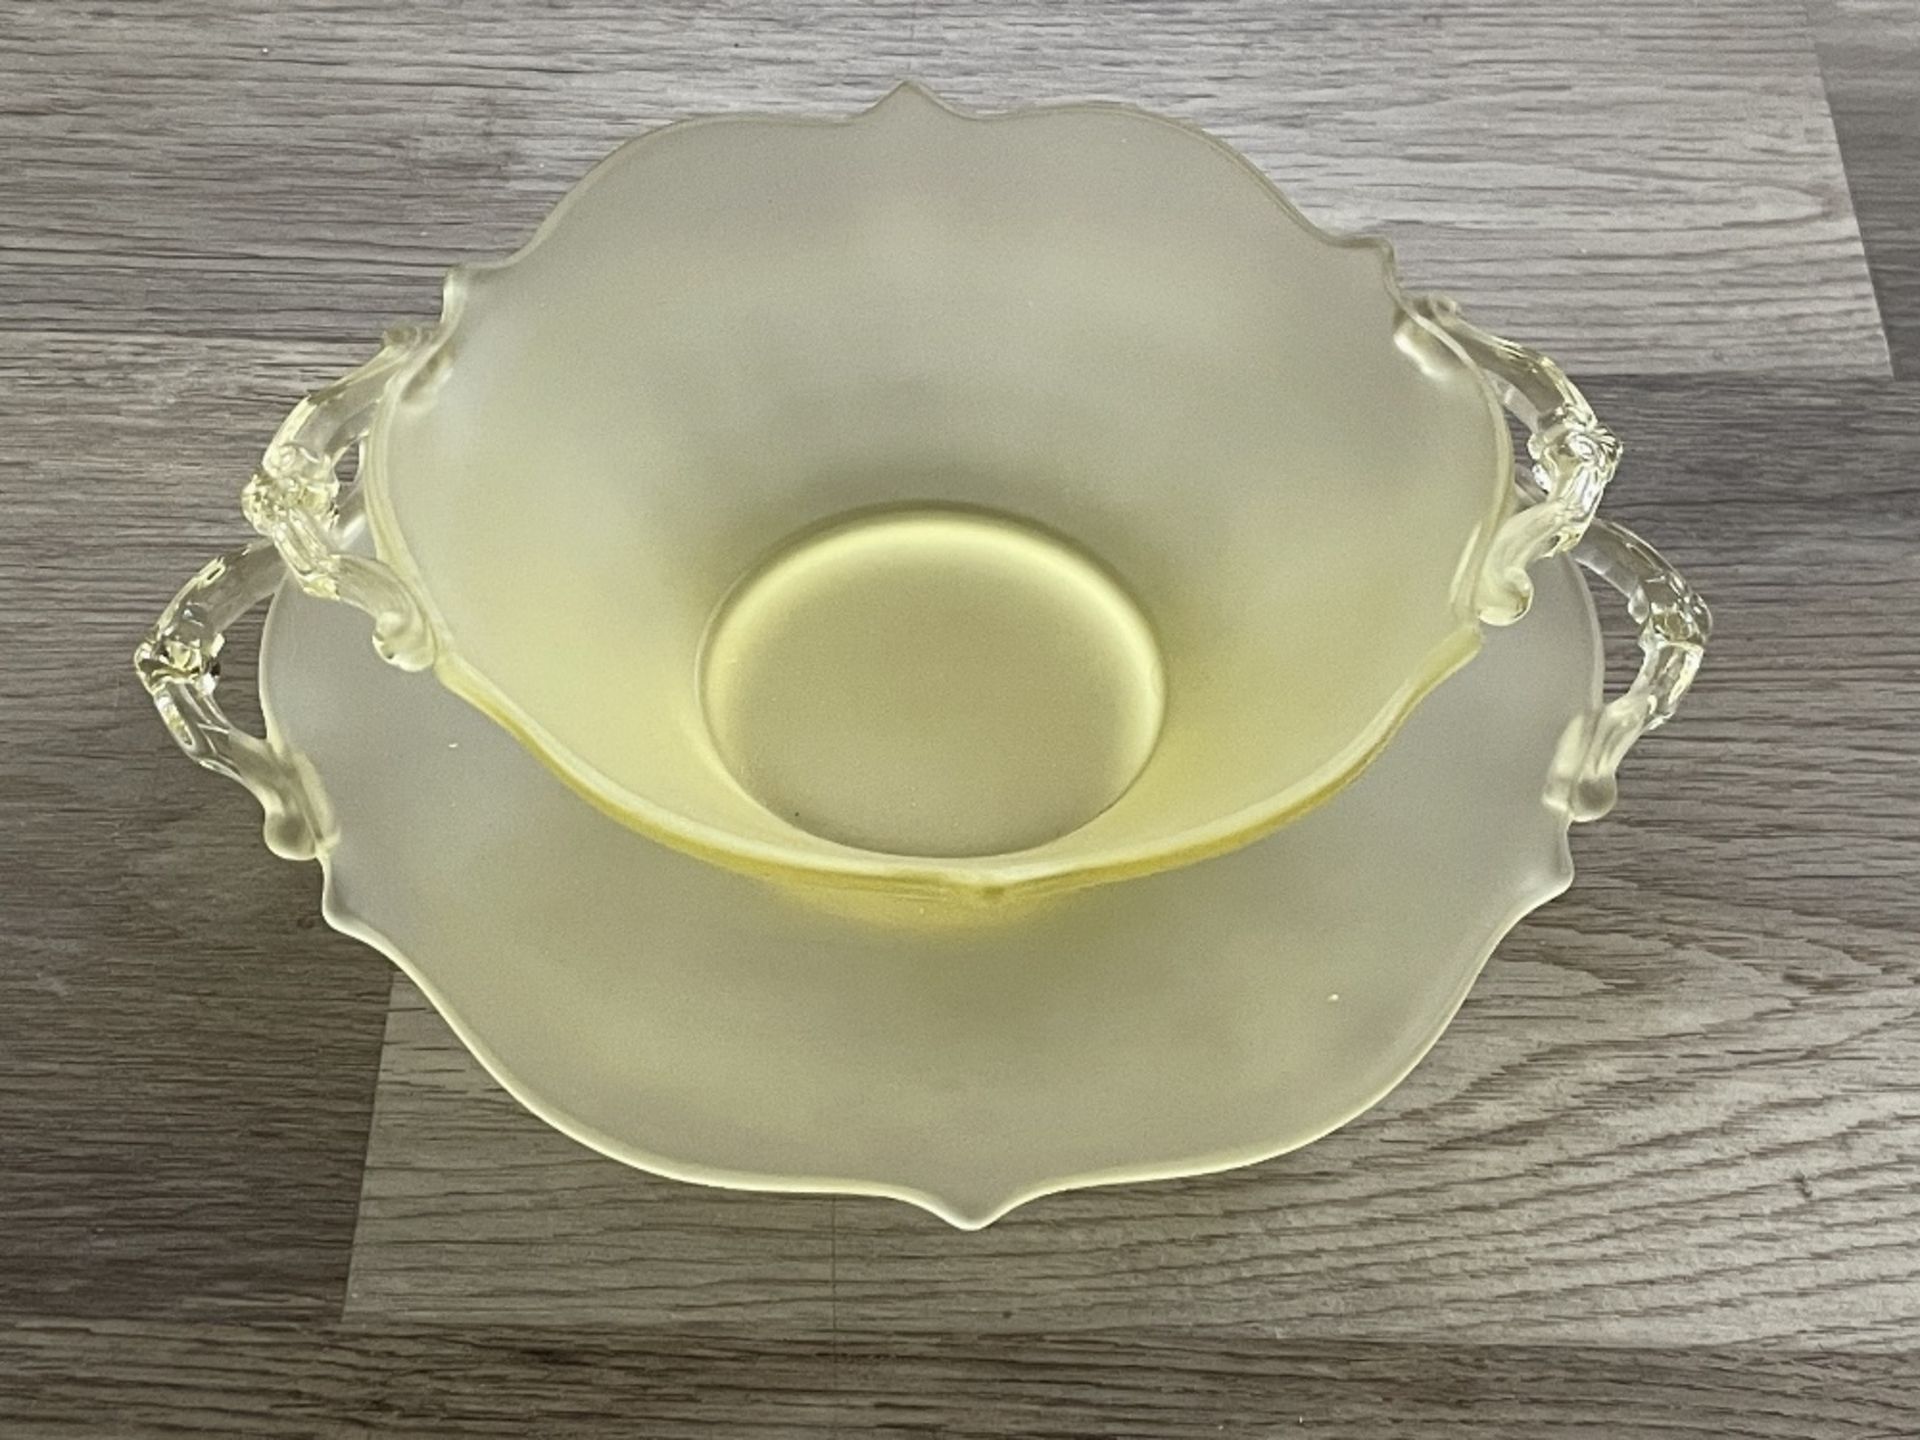 Yellow Depression Era Glass Serving Bowl and Plate